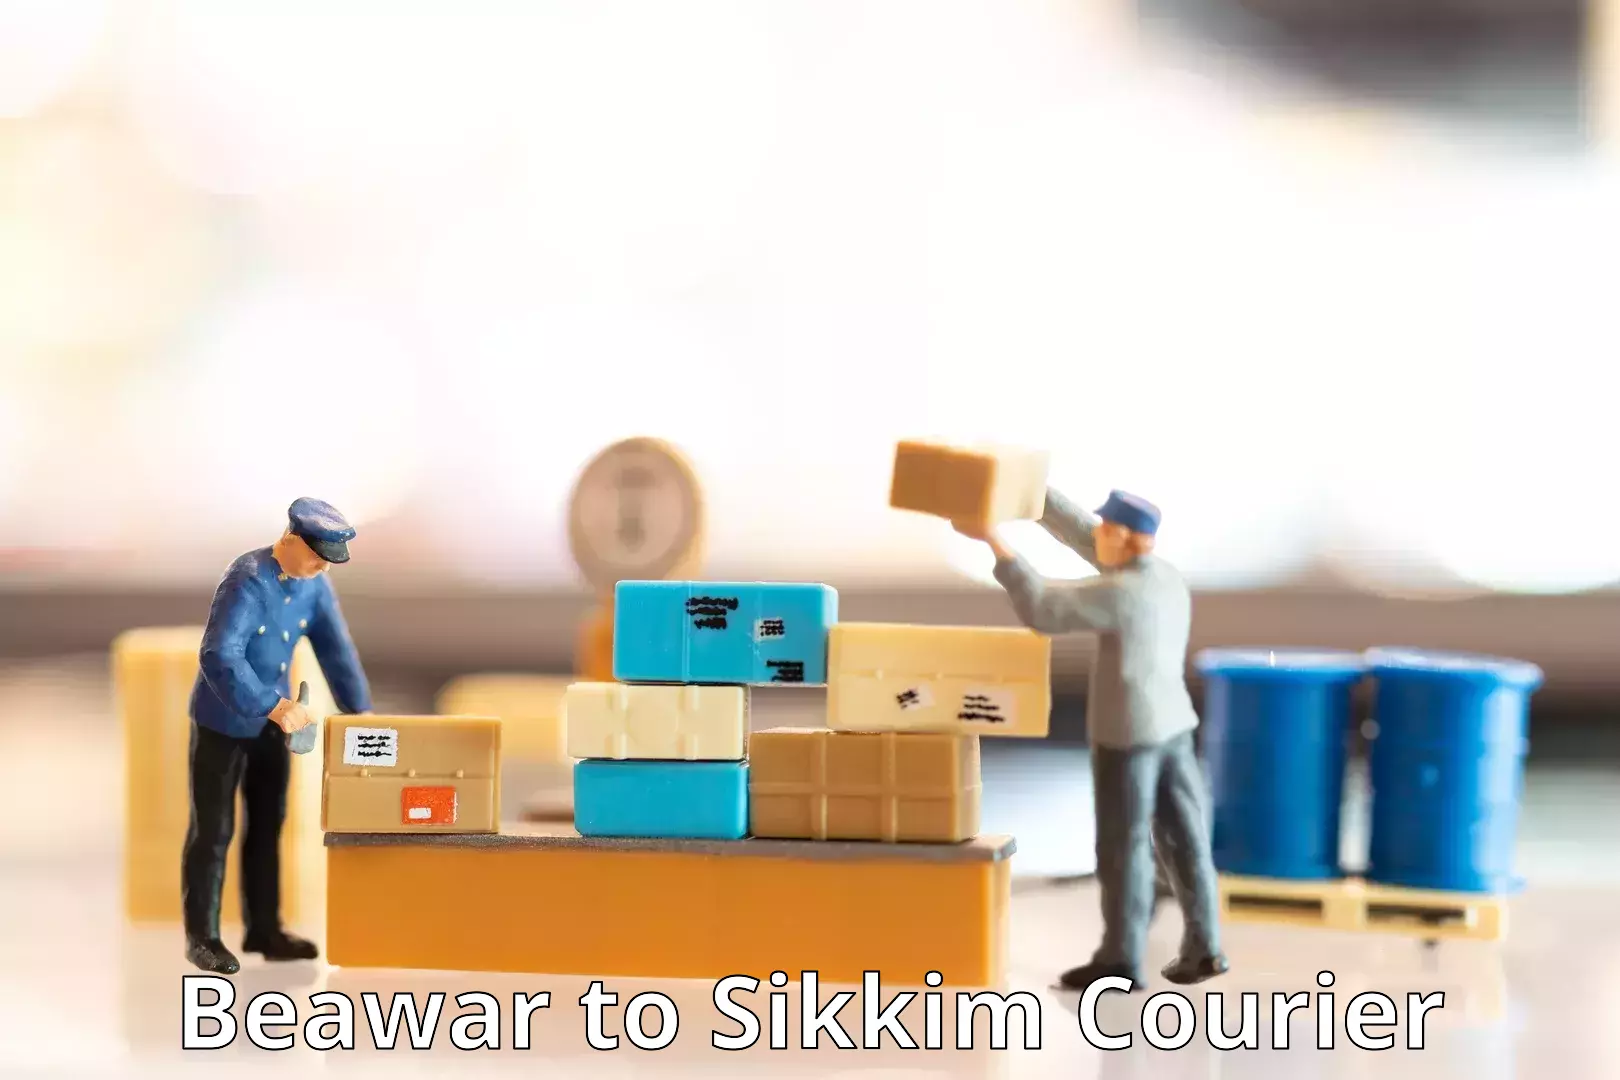 Customer-focused courier Beawar to Sikkim